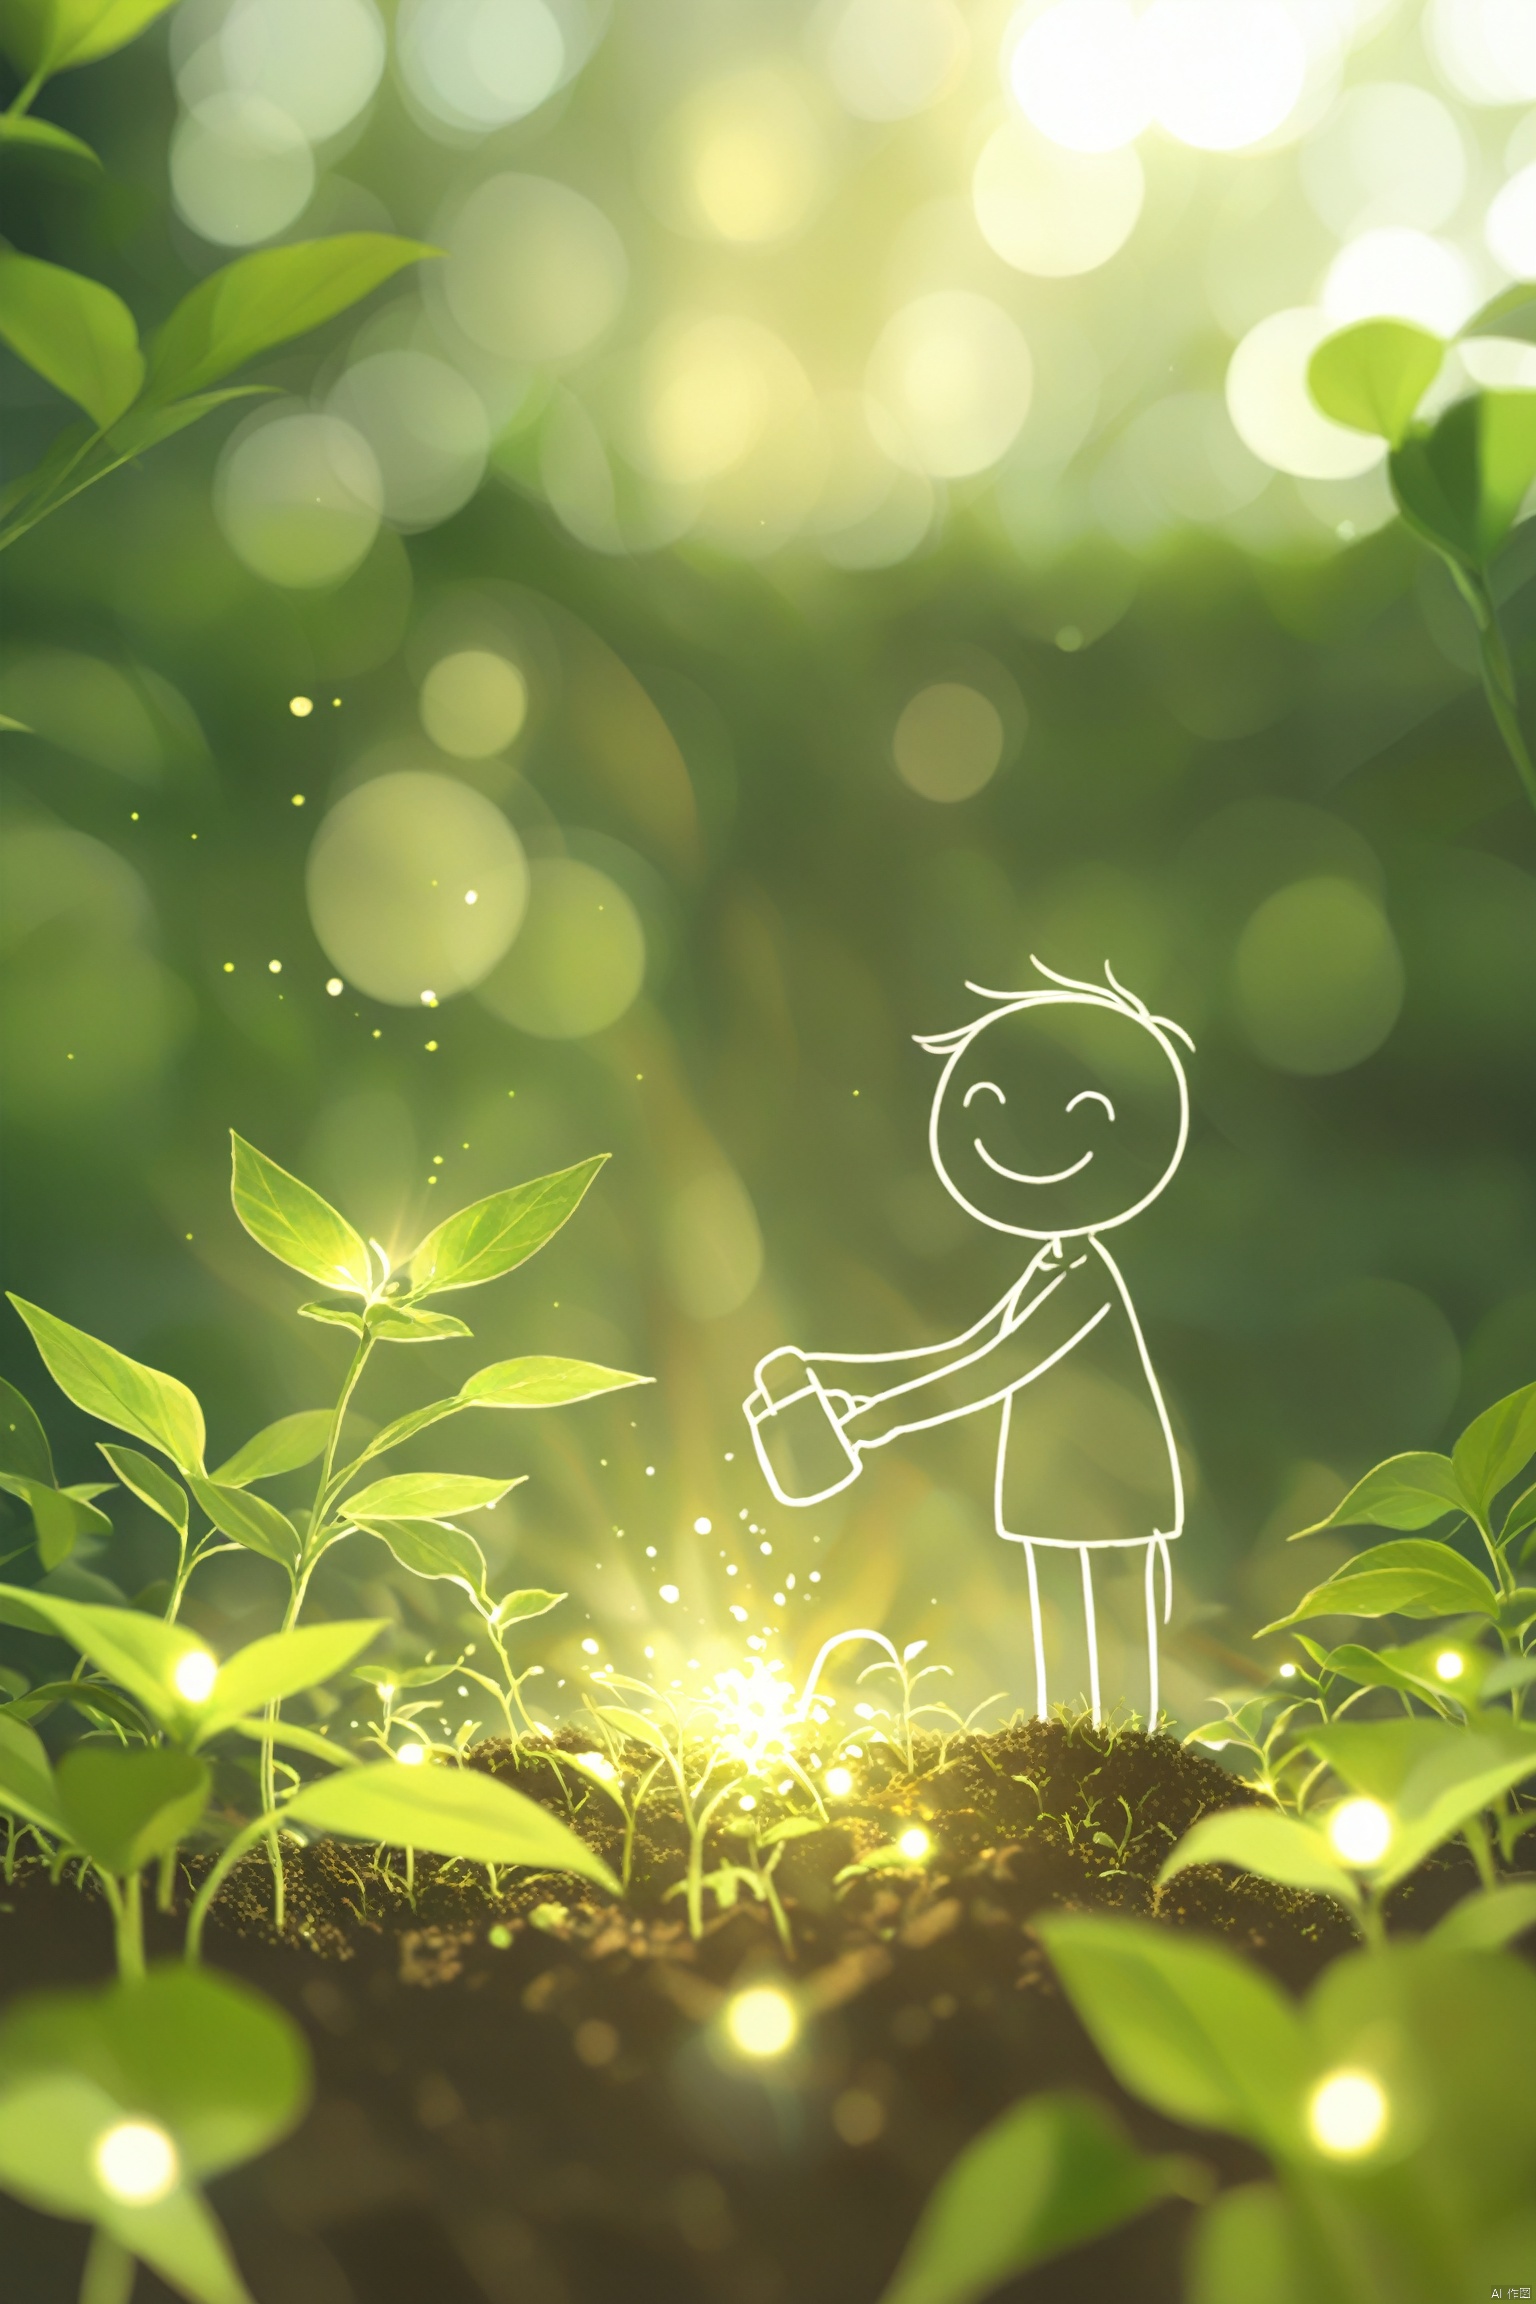  A white line art stick figure with a smile on his face, He was watering the seeds of his small plants (line art) in the ground. The background is a bokeh effect flower garden with burning green and white light dots, with sunlight penetrating through the leaves, detailed, hyper realistic, uhd. make sure the visual impression is creative and attractive